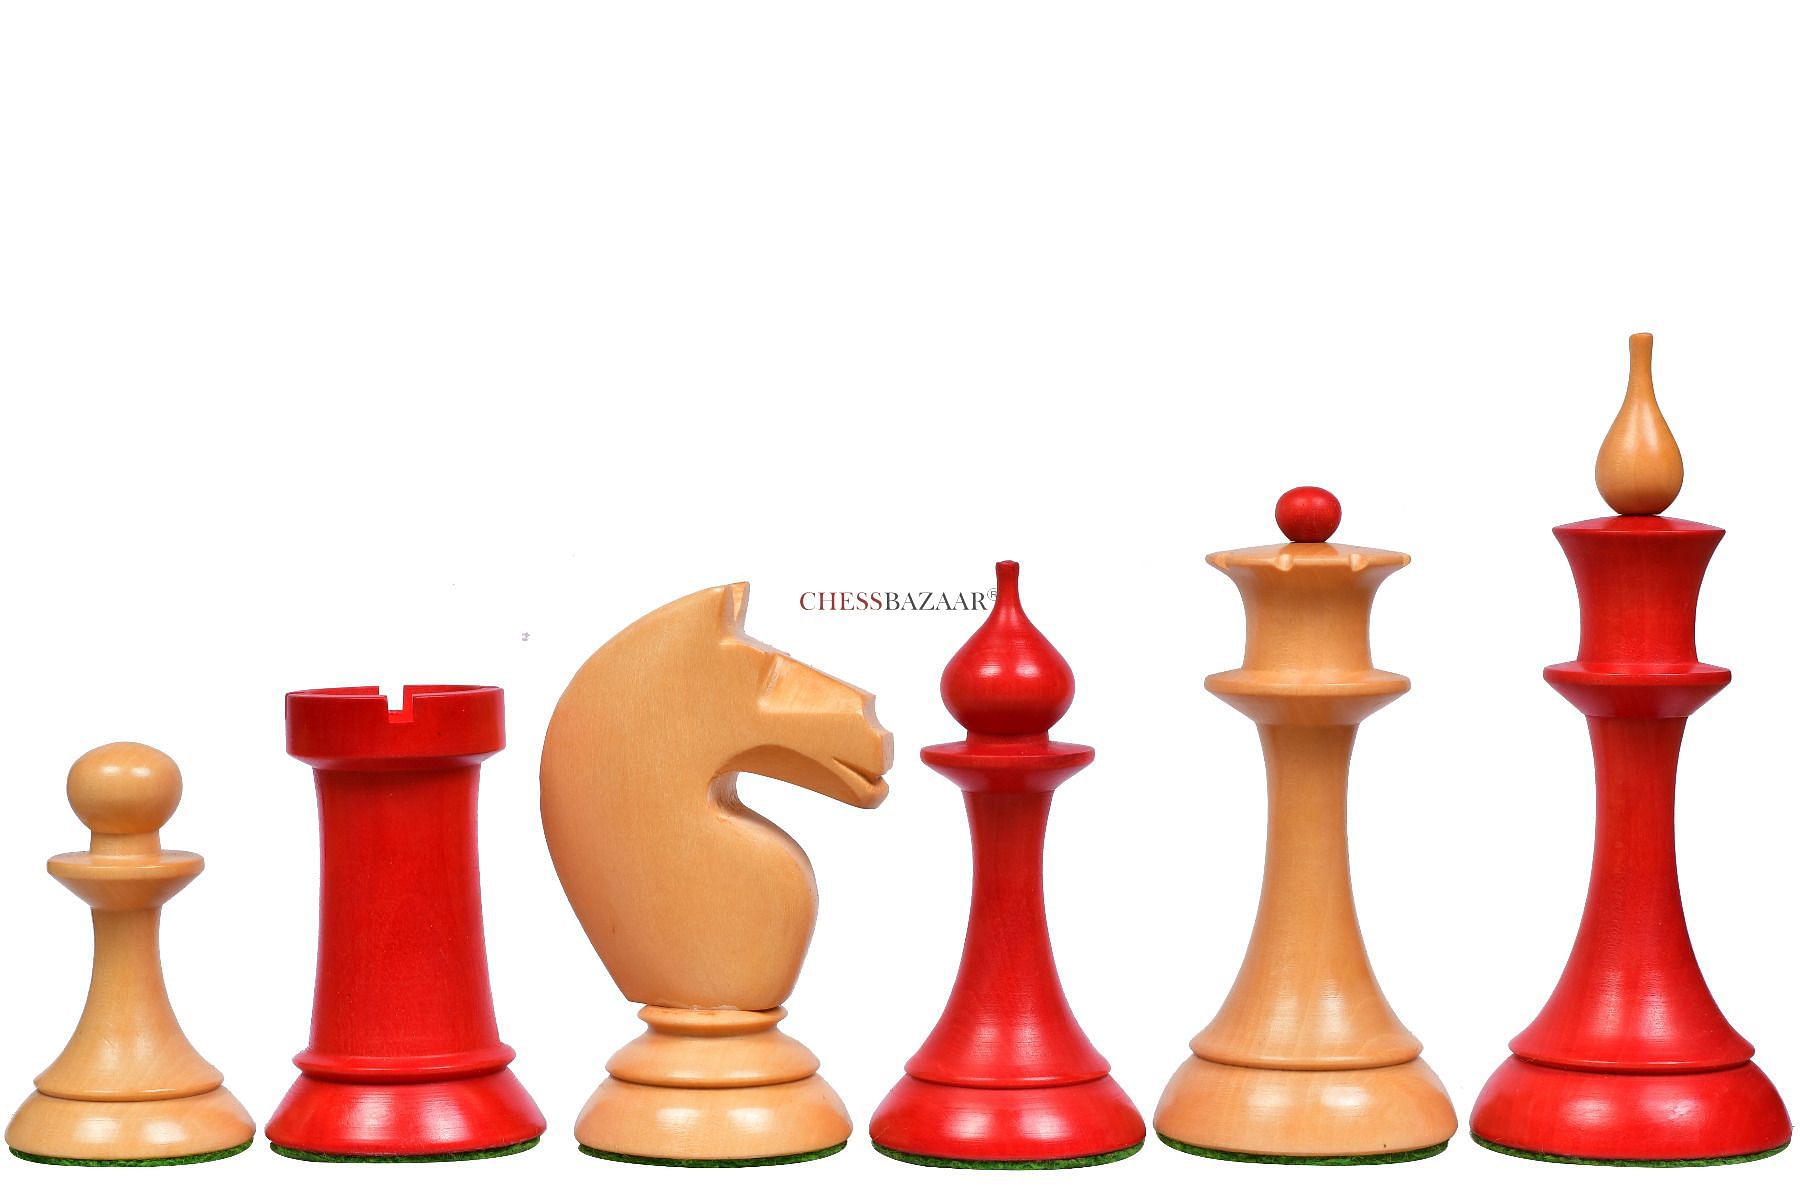 I’m QUEEN - Chess Queen Move | Photographic Print